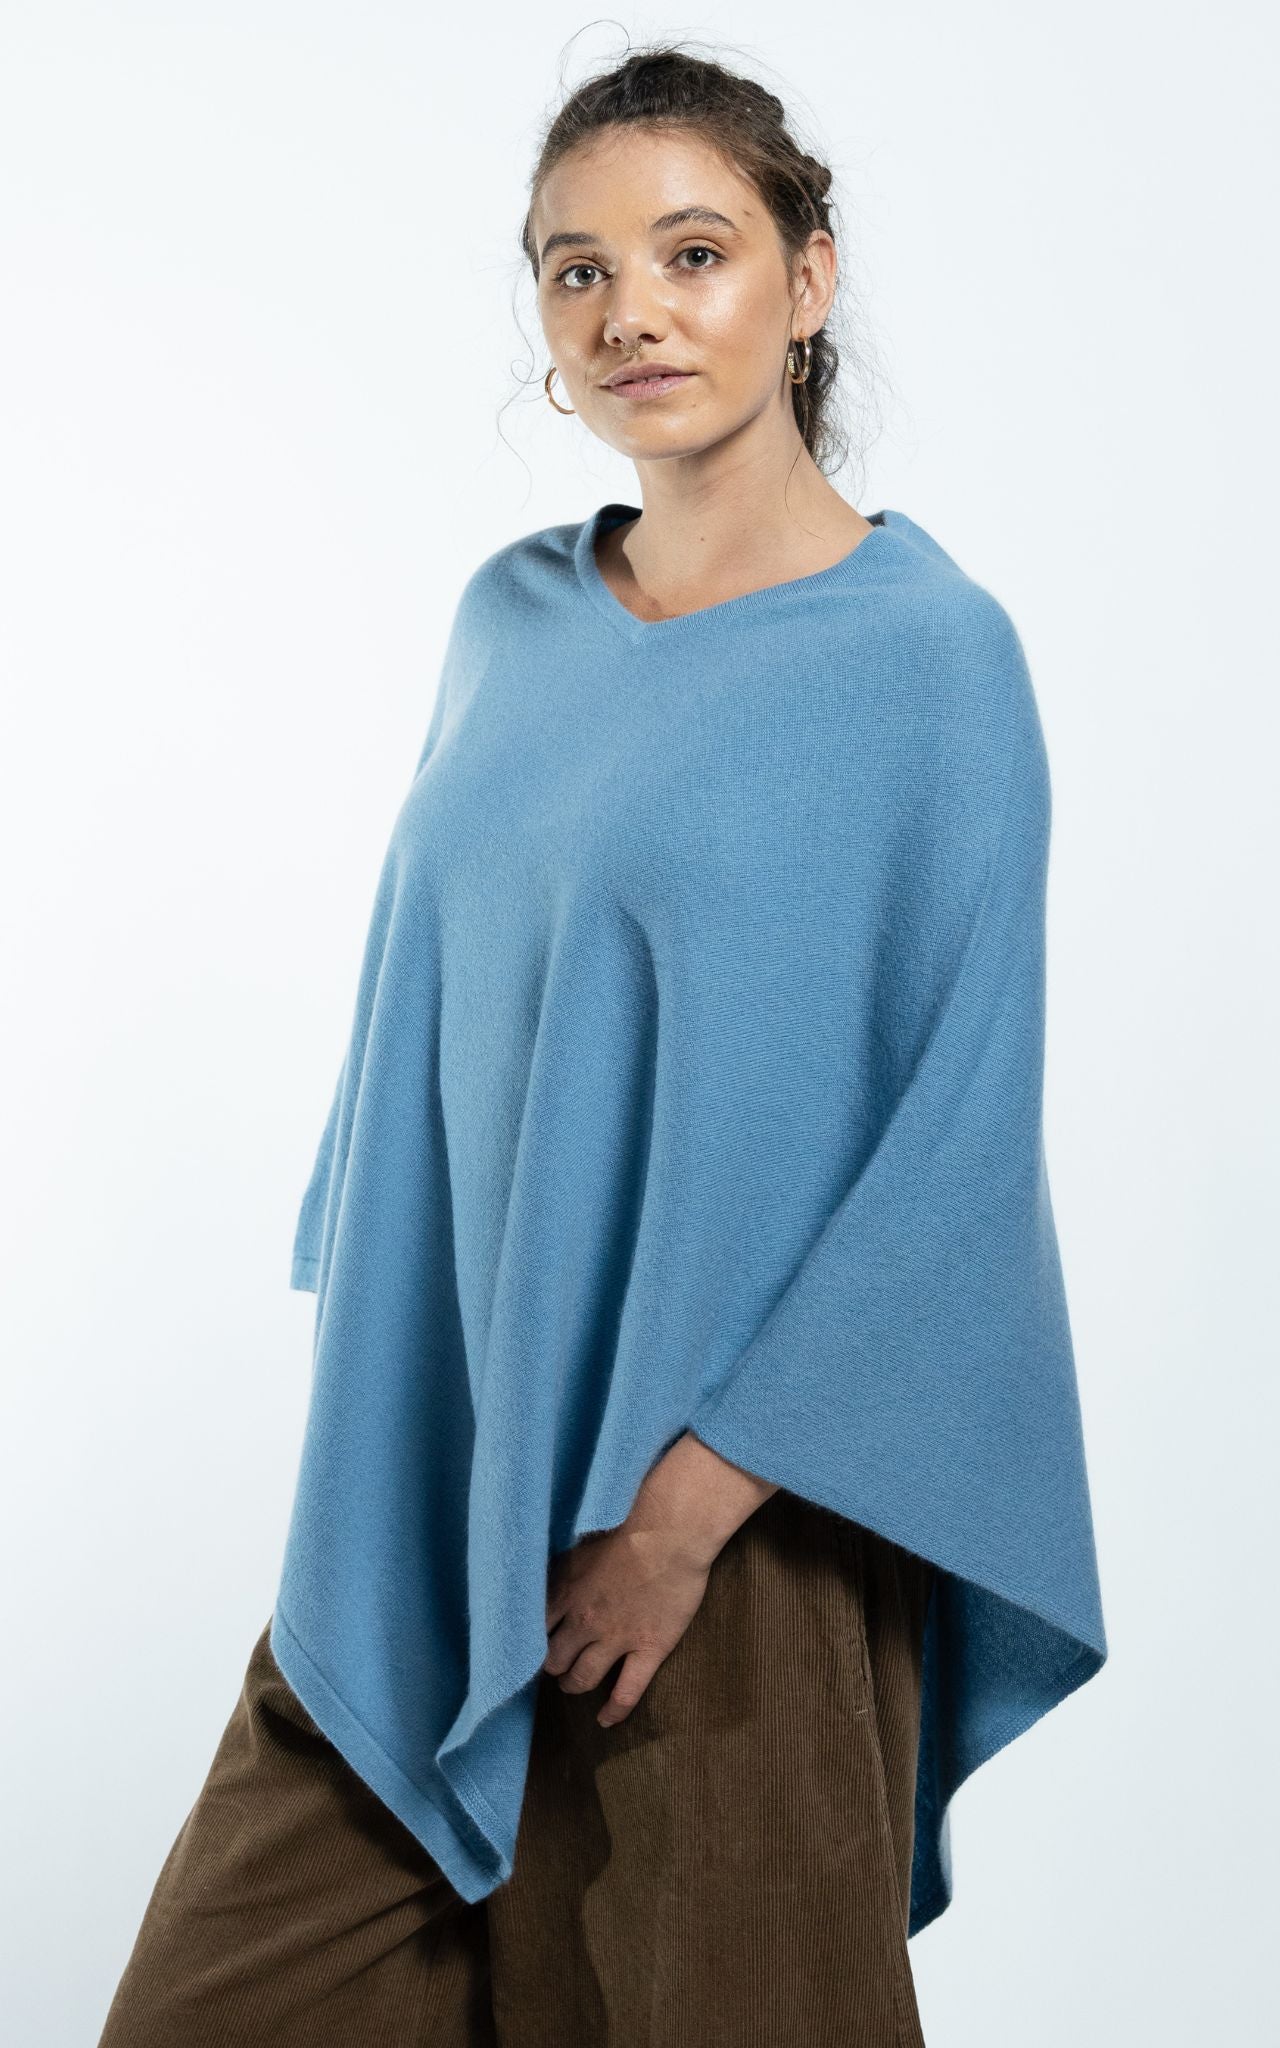 Surya Australia Ethical Cashmere Poncho made in Nepal - Sky Blue